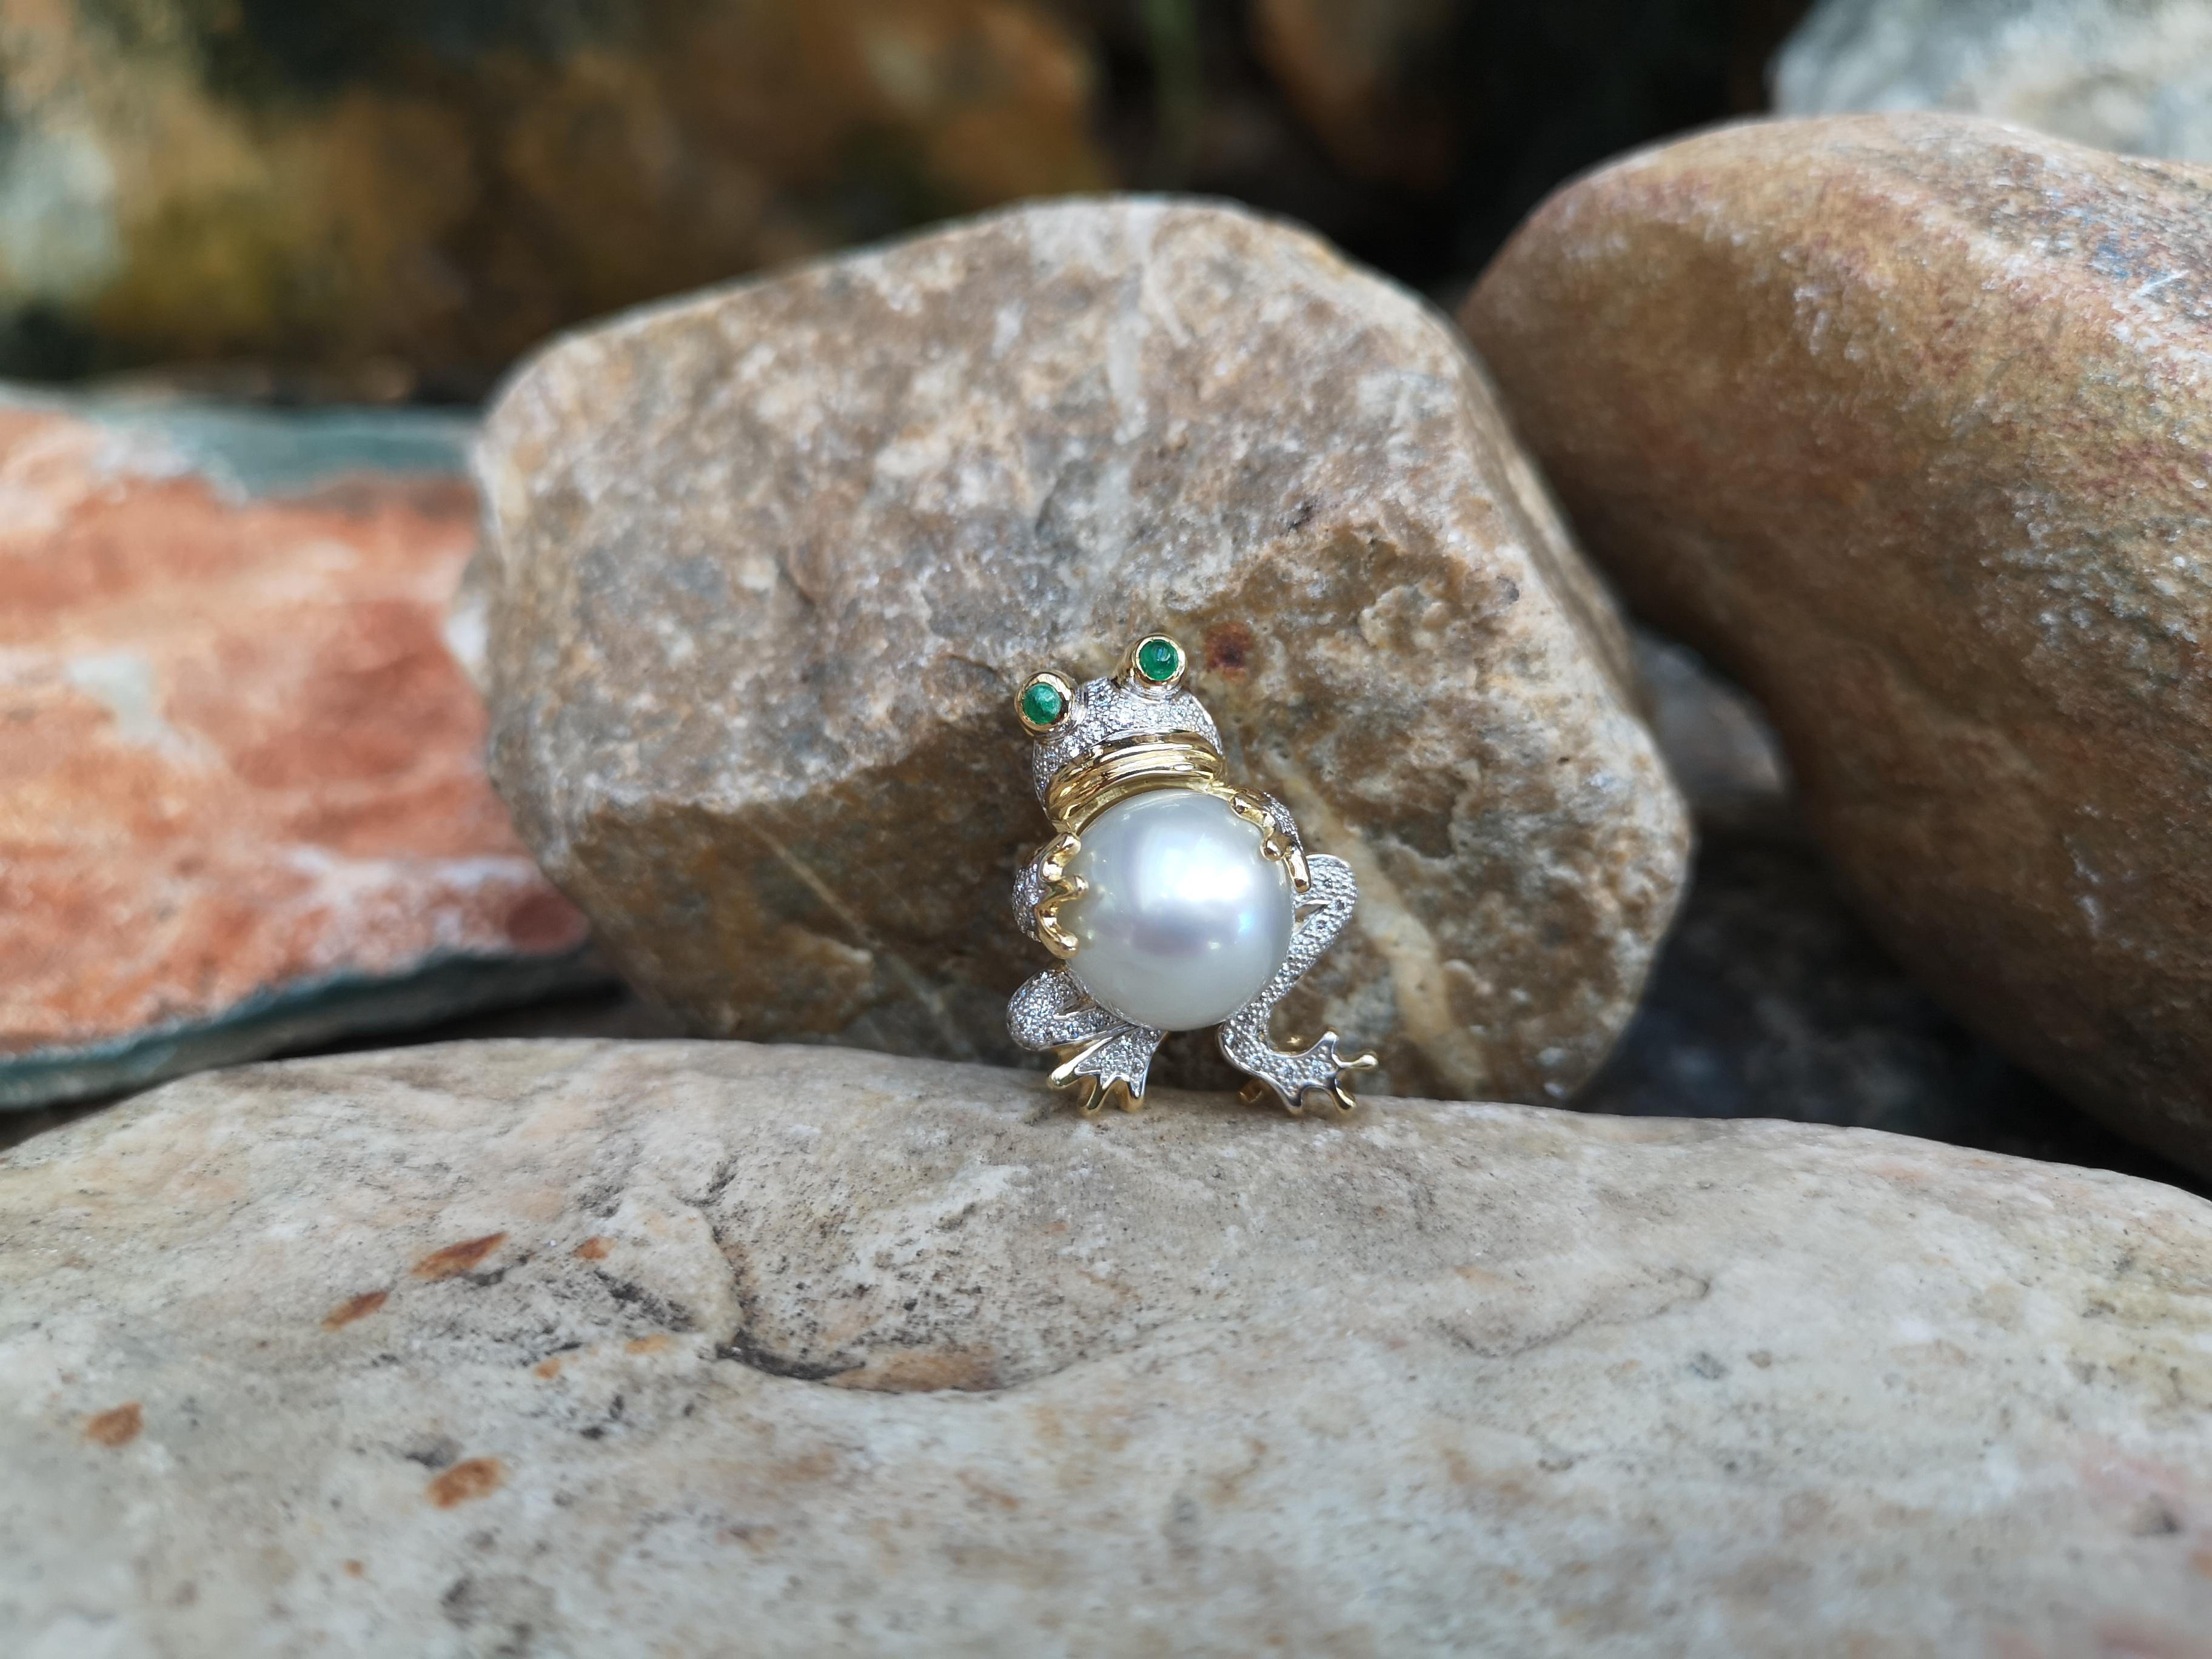 South Sea Pearl with Cabochon Emerald 0.10 carat and Diamond 0.25 carat Brooch set in 18 Karat Gold Settings

Width:  2.2 cm 
Length: 3.0 cm
Total Weight: 12.54 grams

